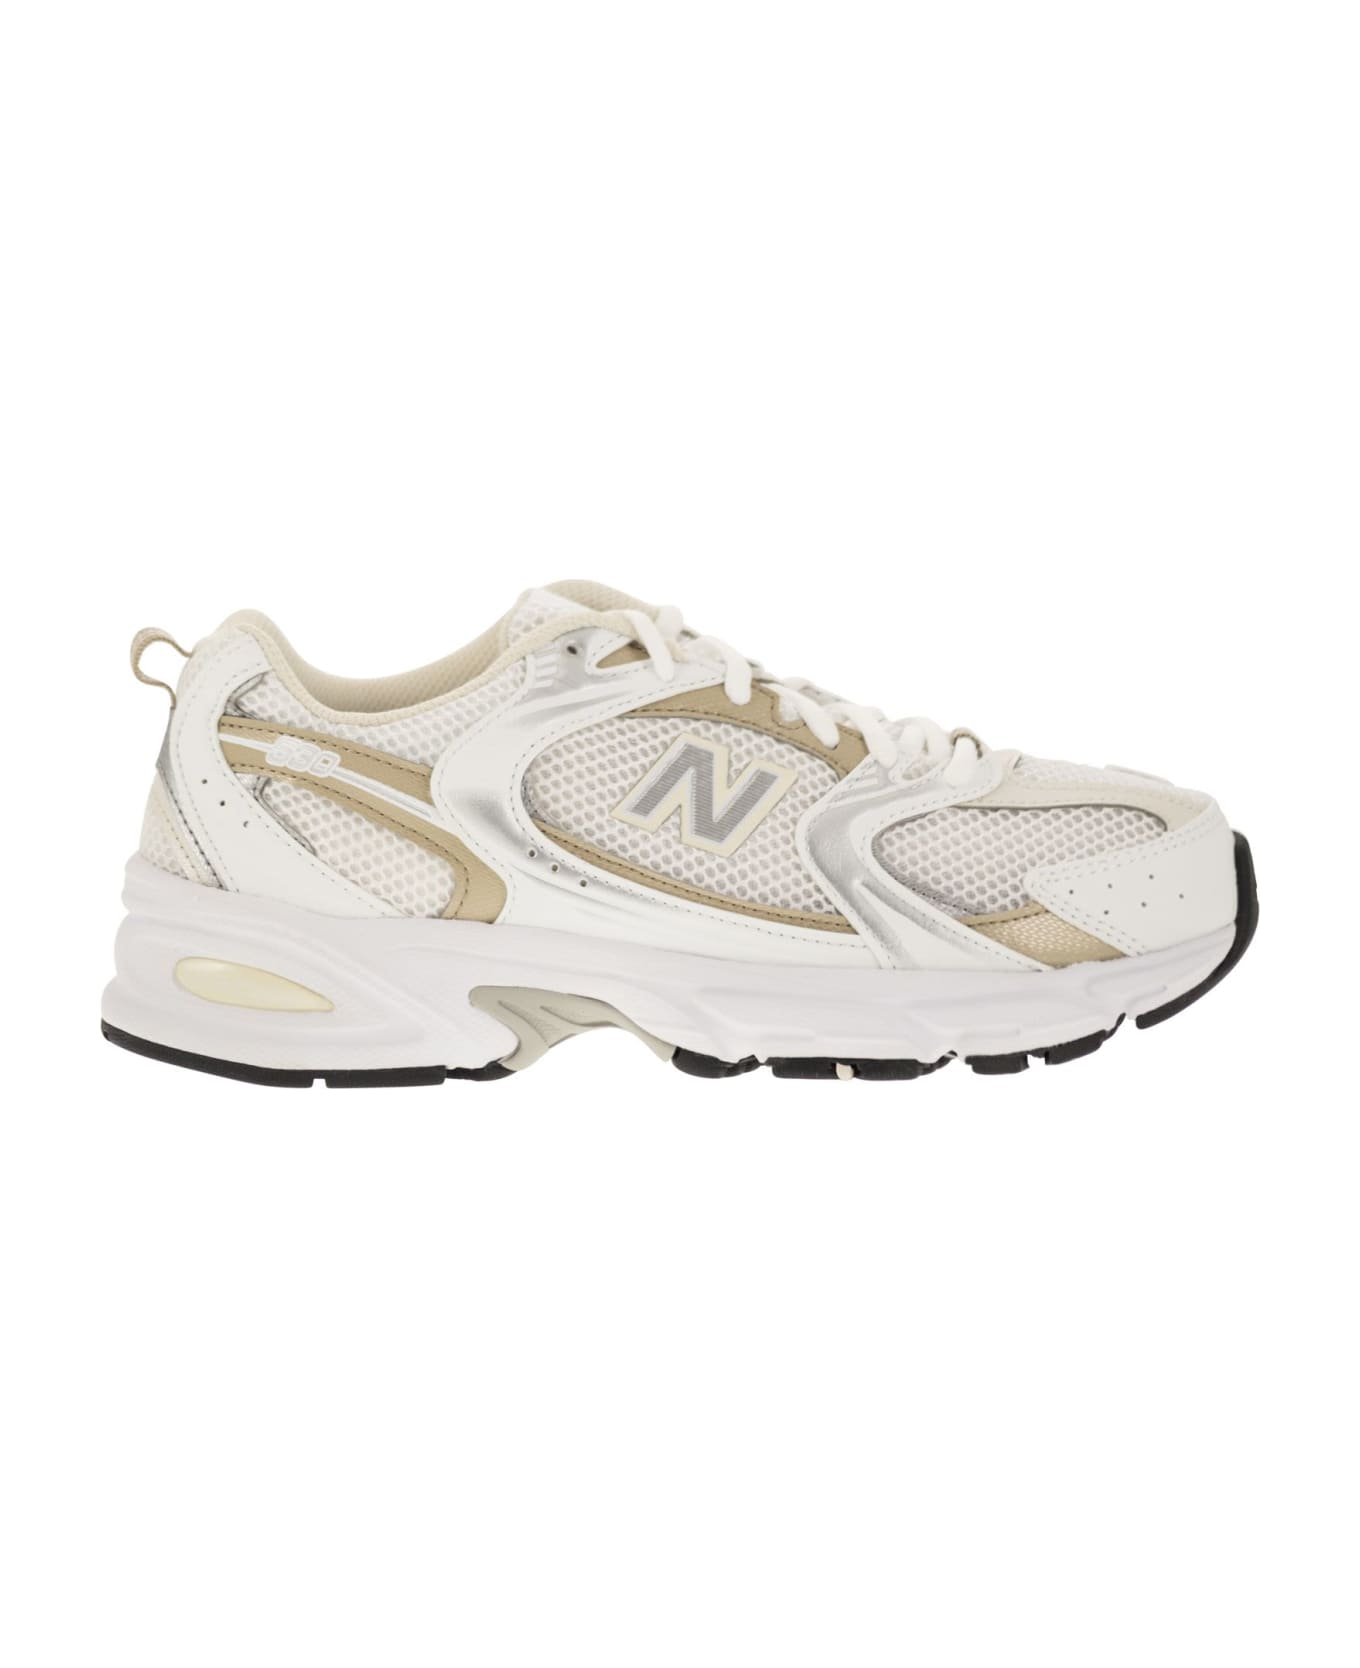 New Balance 530 - Sneakers Lifestyle - White/beige